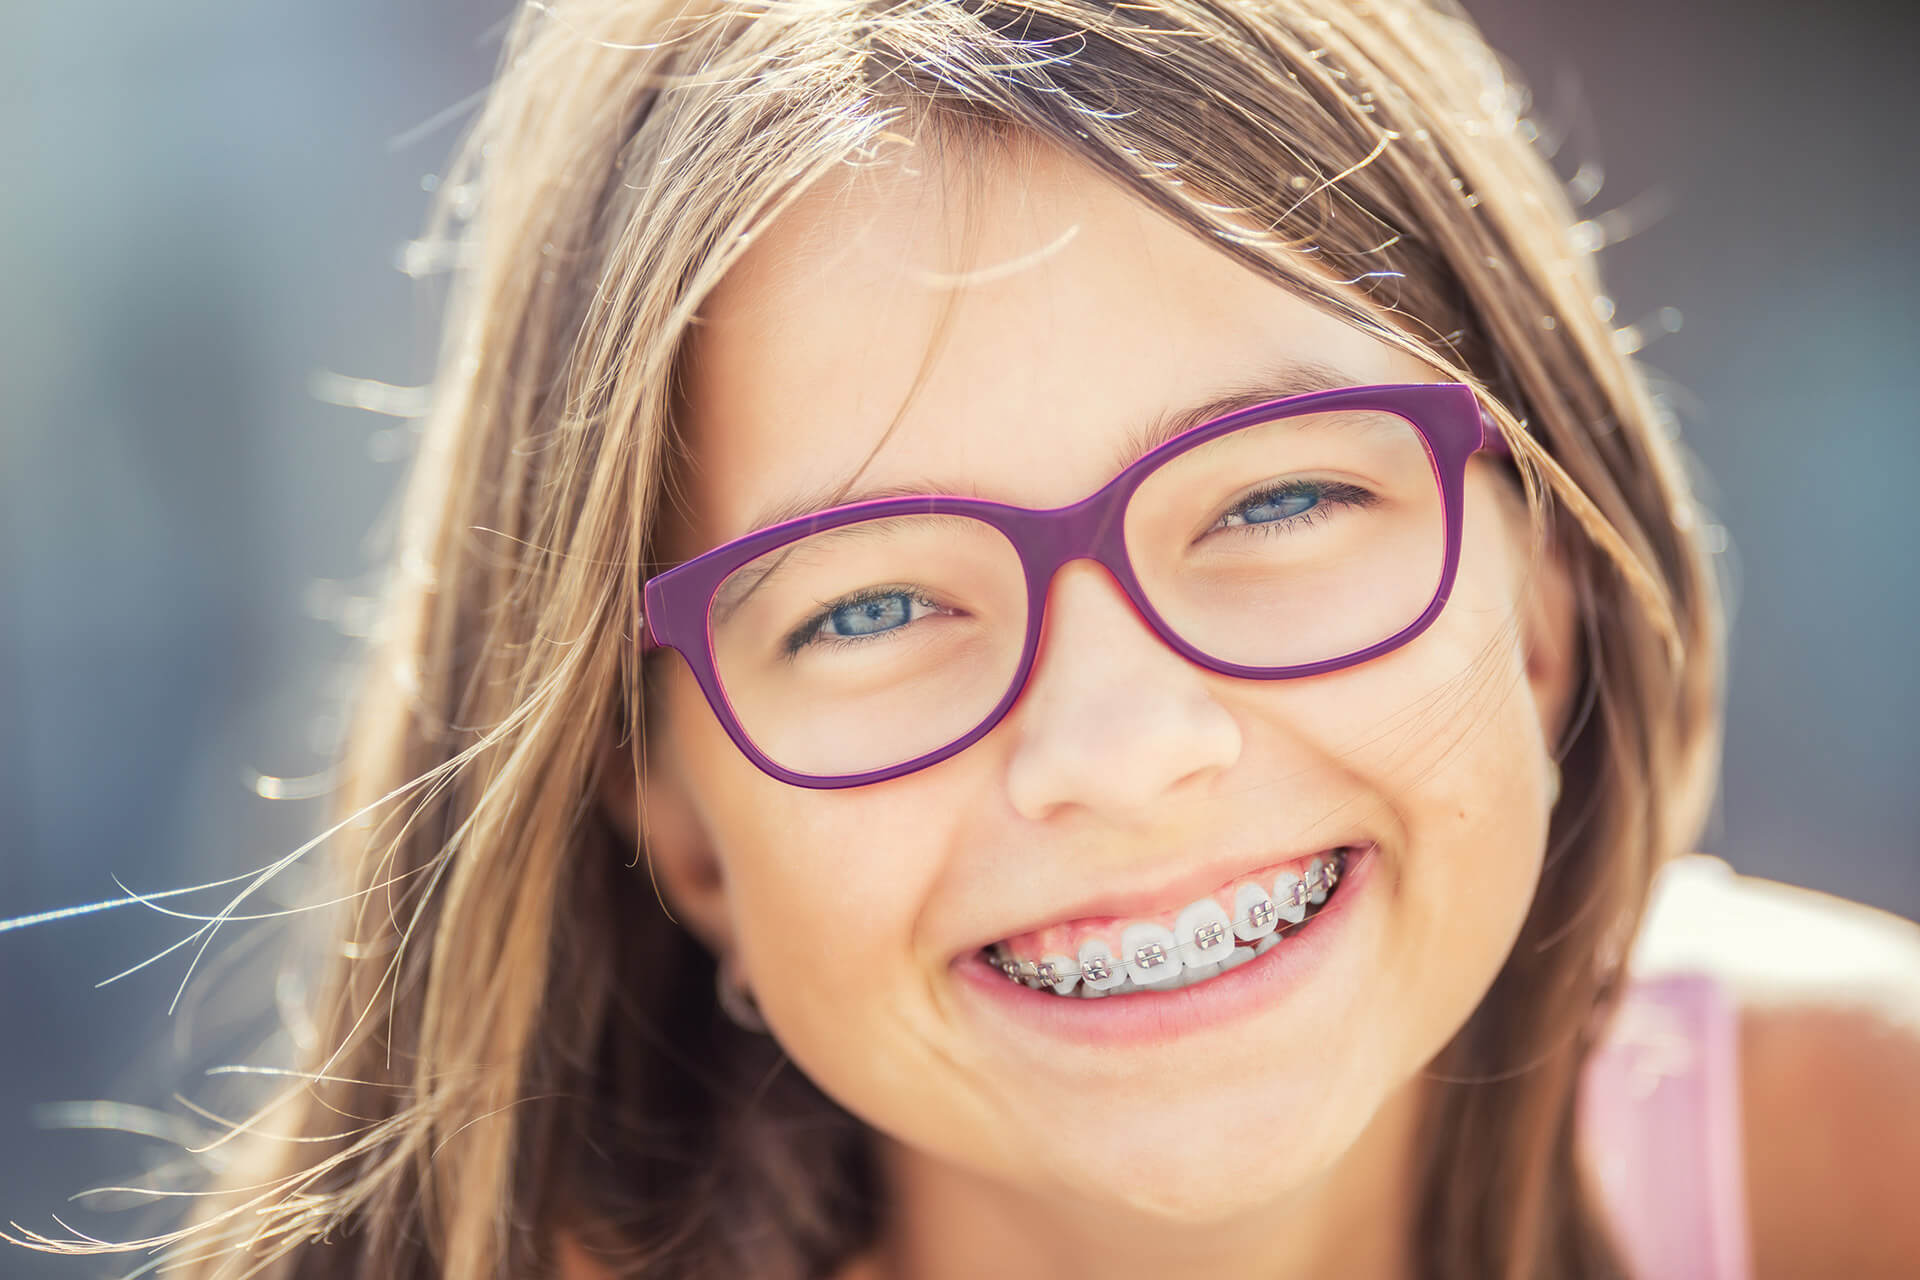 young girl with braces and glasses